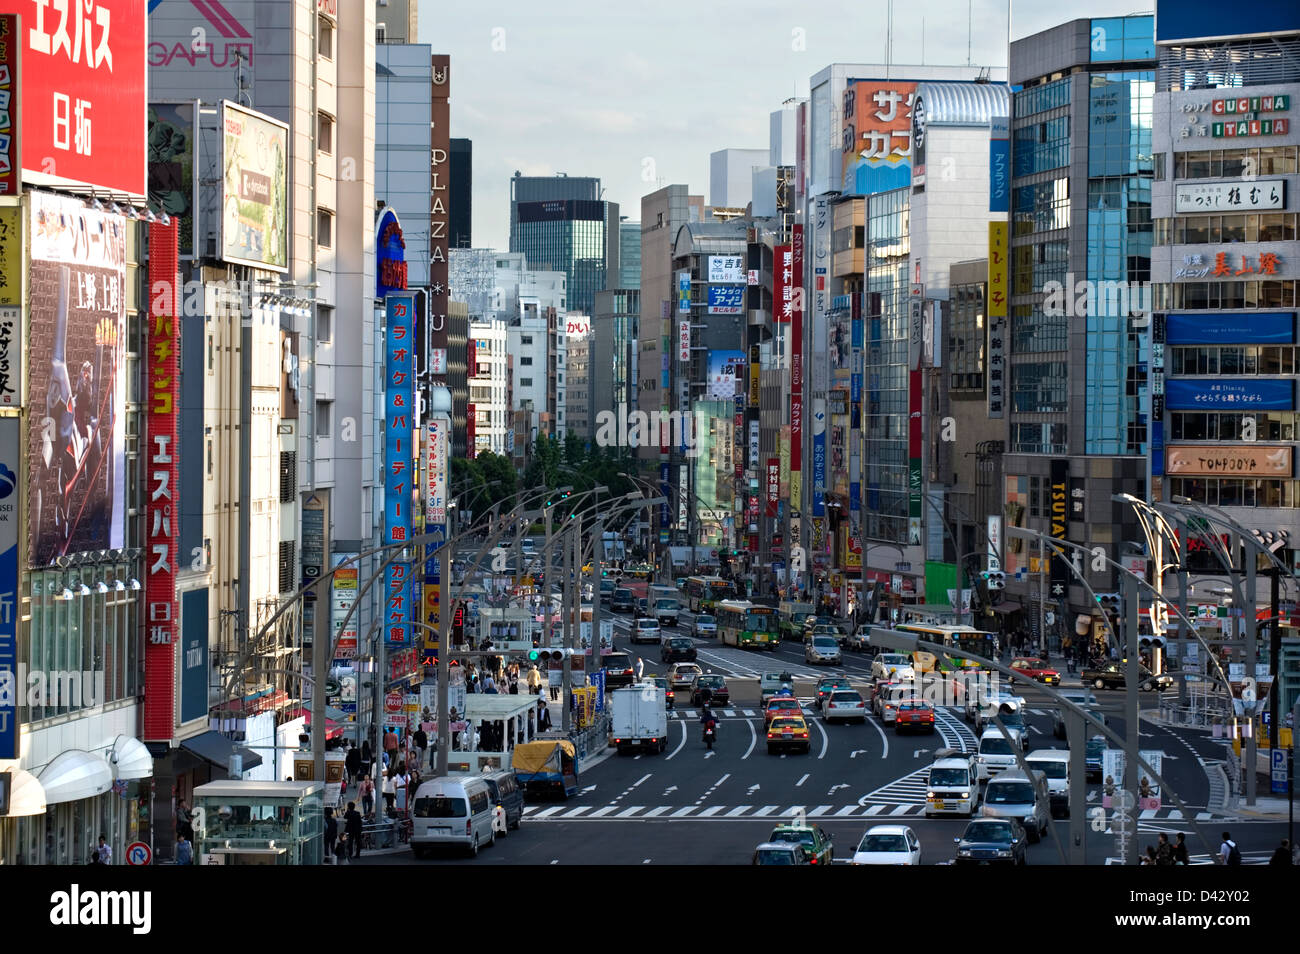 Showa-dori Street weaves it way through a canyon of high-rise buildings covered with advertising signs in Ueno, Tokyo. Stock Photo